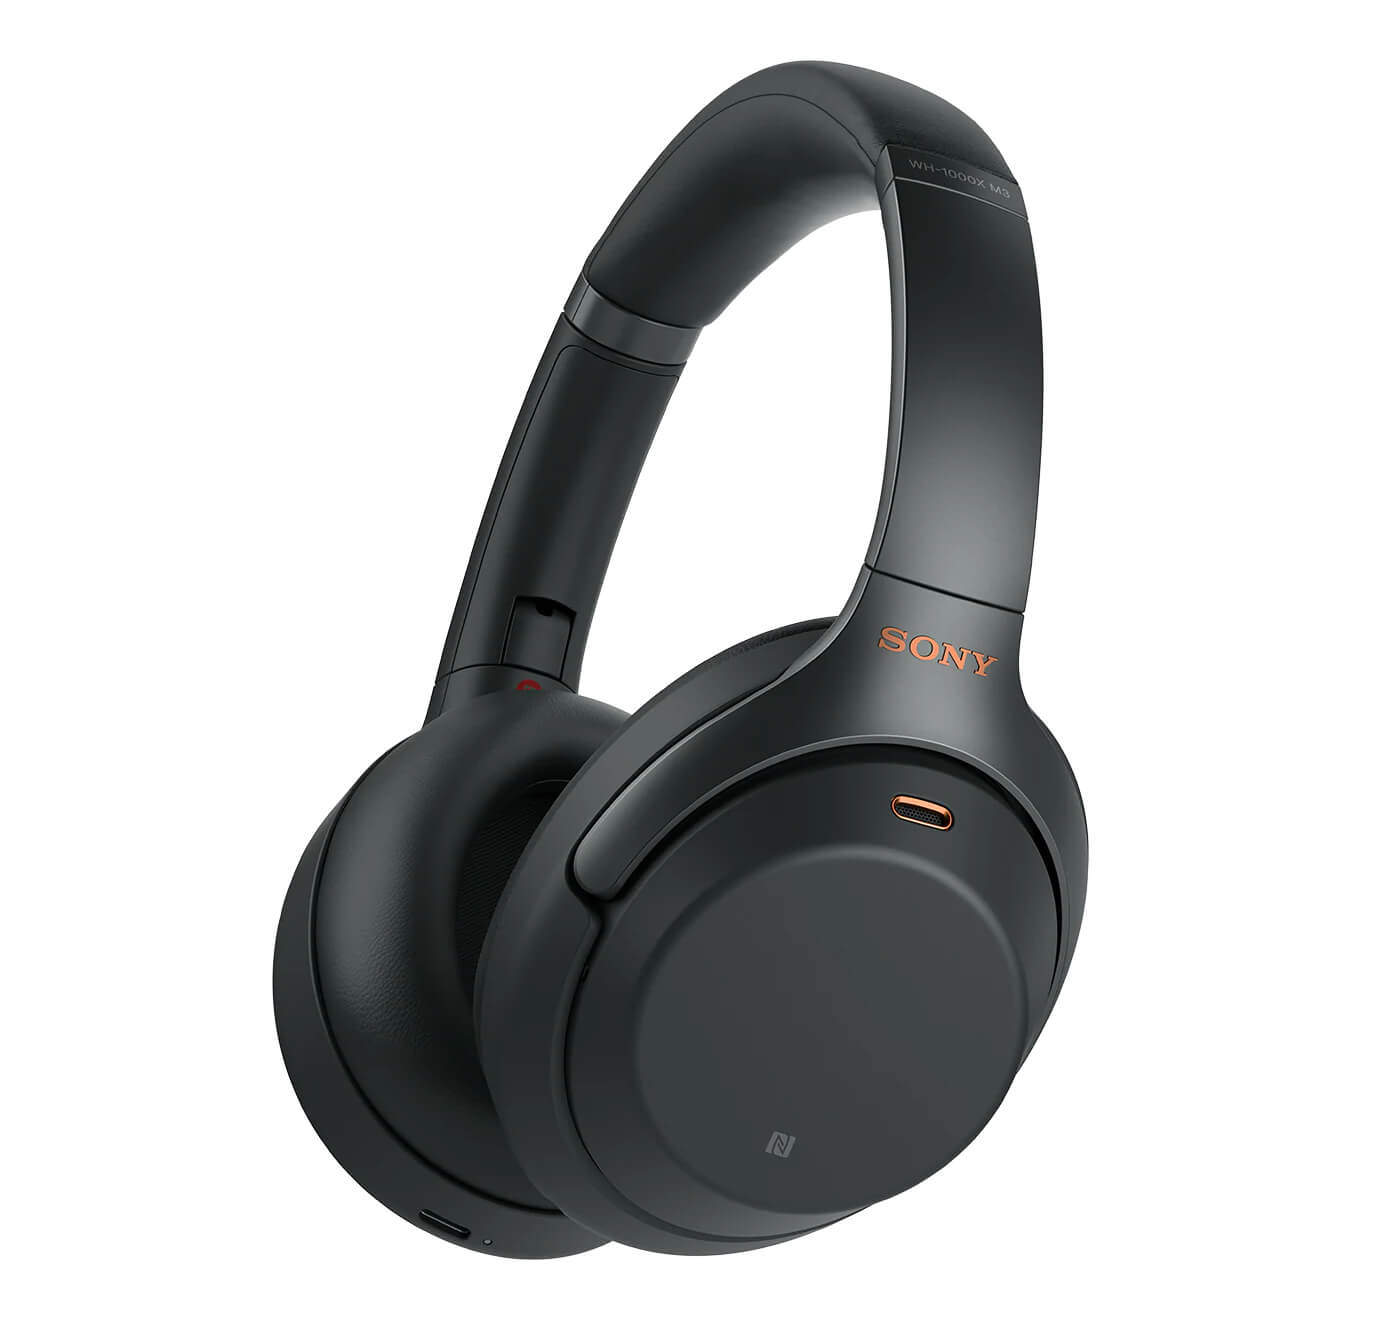 Sony-WH1000XM3-Wireless-Industry-Leading-Noise-Canceling-Over-Ear-Headphones